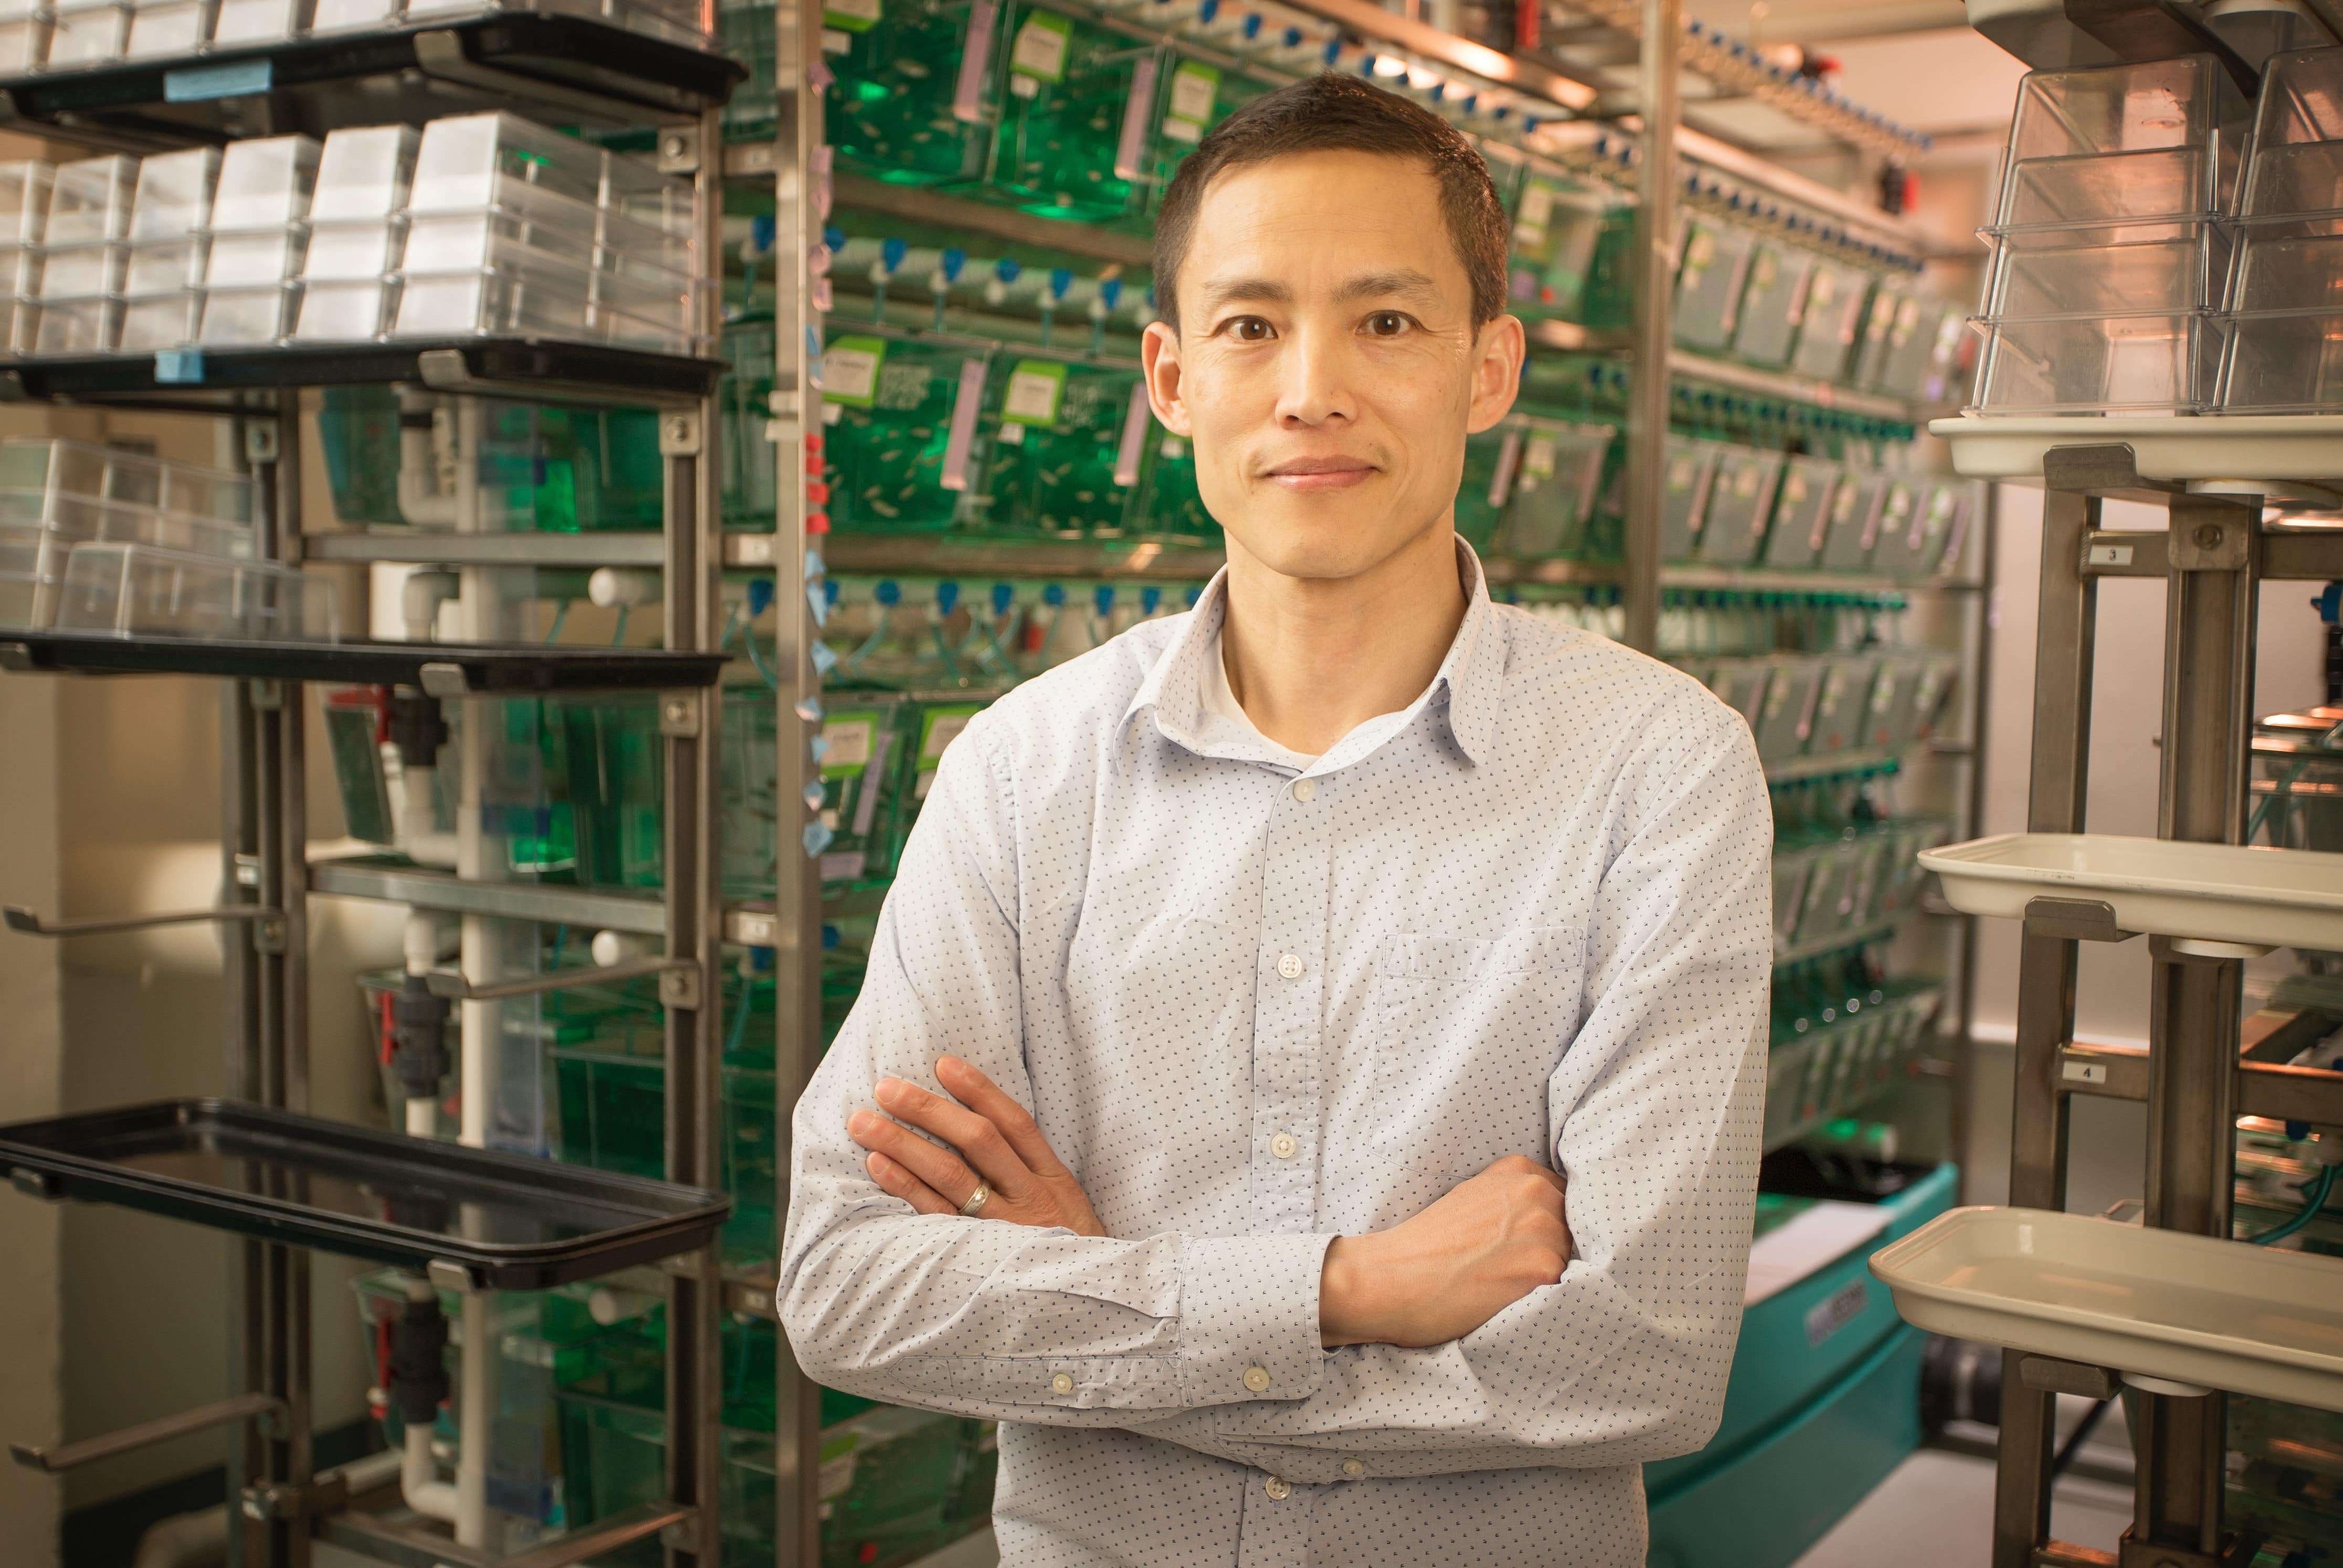 Viravuth (“Voot”) Yin, standing with arms crossed and smiling in front of a shelves holding tanks of zebrafish in his lab.